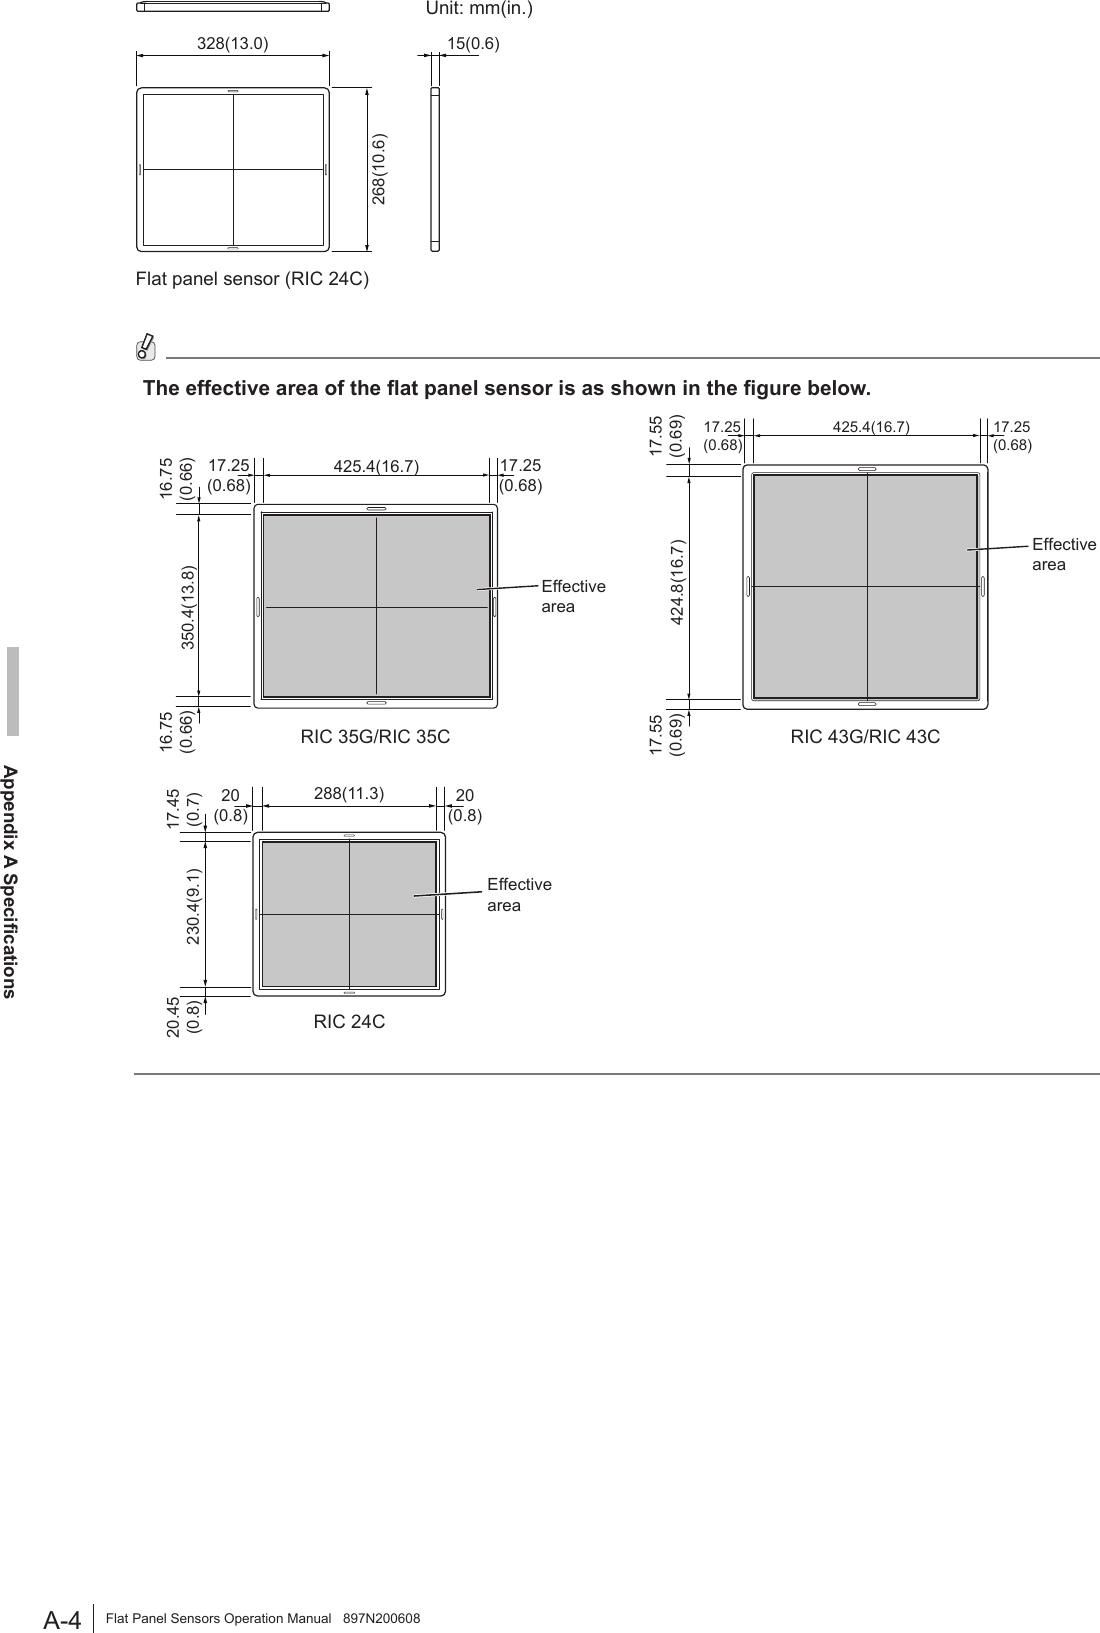 A-4Appendix A SpecificationsFlat Panel Sensors Operation Manual   897N20060815(0.6)328(13.0)268(10.6)Flat panel sensor (RIC 24C)The effective area of the at panel sensor is as shown in the gure below.20(0.8)20(0.8)288(11.3)230.4(9.1)17.45(0.7)20.45(0.8)Effectivearea RIC 24CEffectivearea 425.4(16.7) 17.25(0.68)17.25(0.68)16.75(0.66)16.75(0.66) 350.4(13.8)425.4(16.7) 17.25(0.68)17.25(0.68)Effective area 17.55(0.69)17.55(0.69) 424.8(16.7)RIC 35G/RIC 35C RIC 43G/RIC 43CUnit: mm(in.)